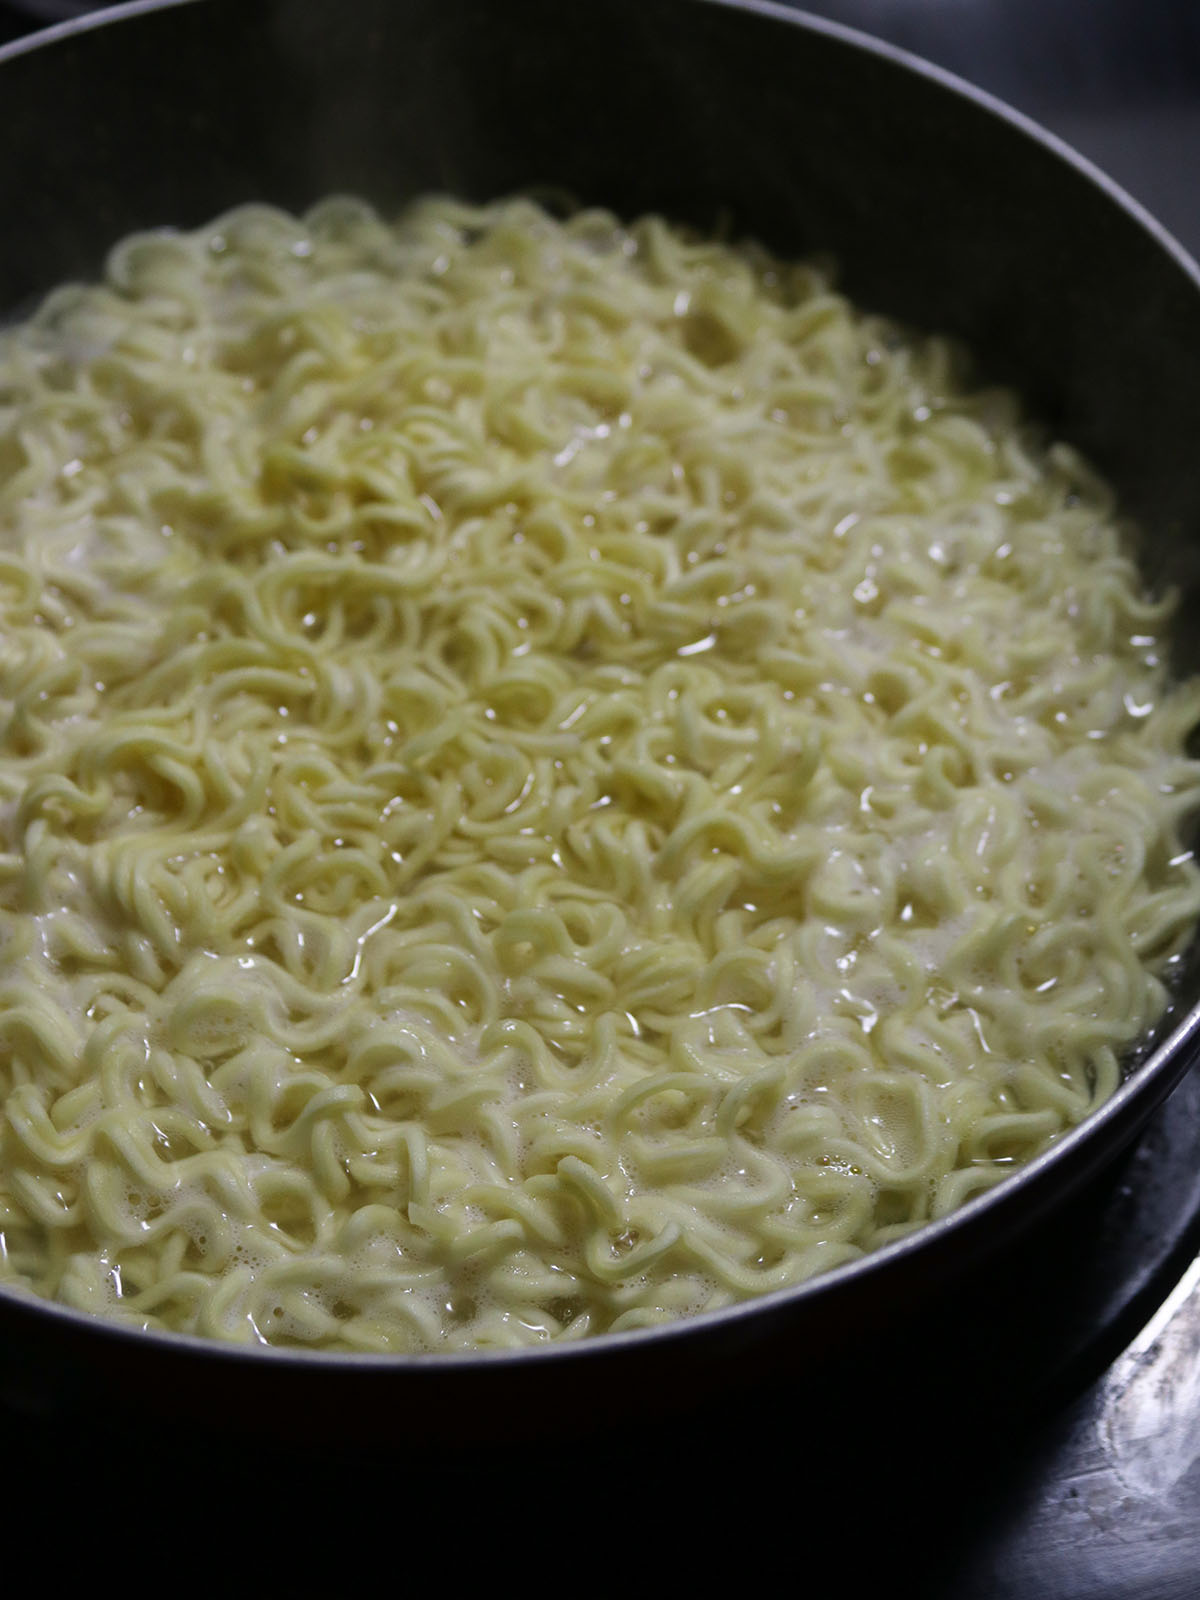 cooking instant ramen noodles in a boiling water in a pot